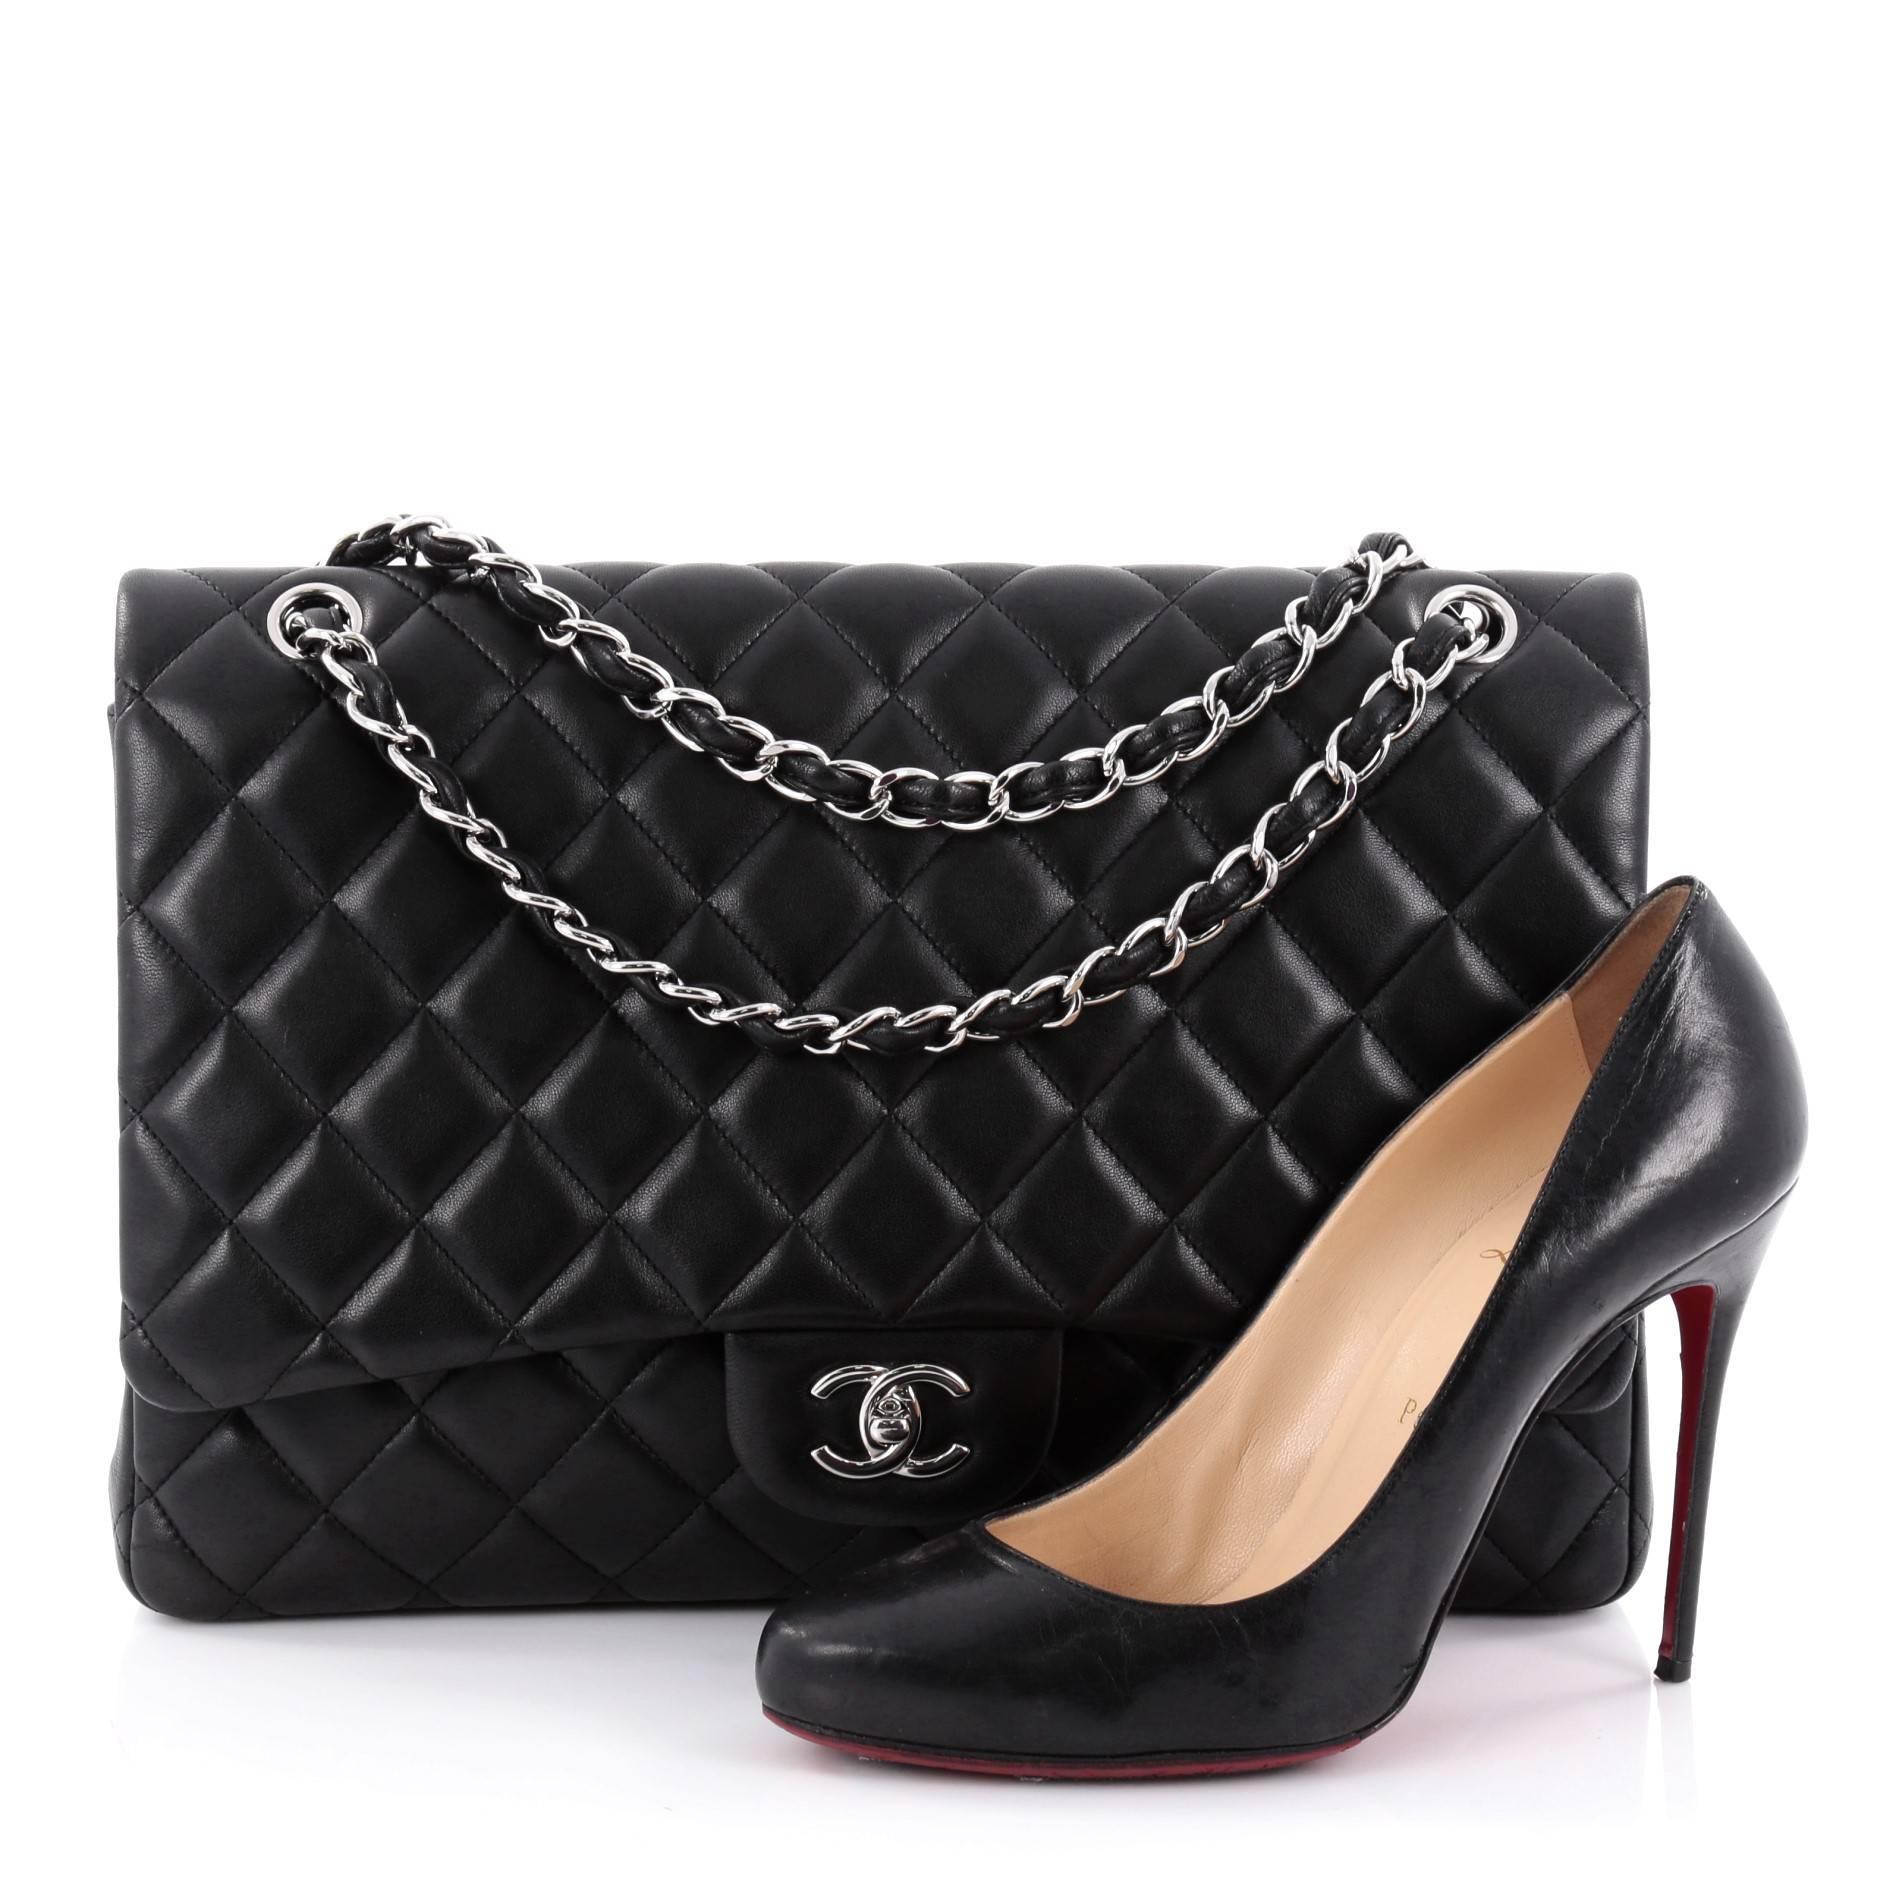 This authentic Chanel Classic Single Flap Bag Quilted Lambskin Maxi exudes a classic yet easy style made for the modern woman. Crafted from black quilted lambskin leather, this elegant flap features Chanel's signature diamond quilted design,